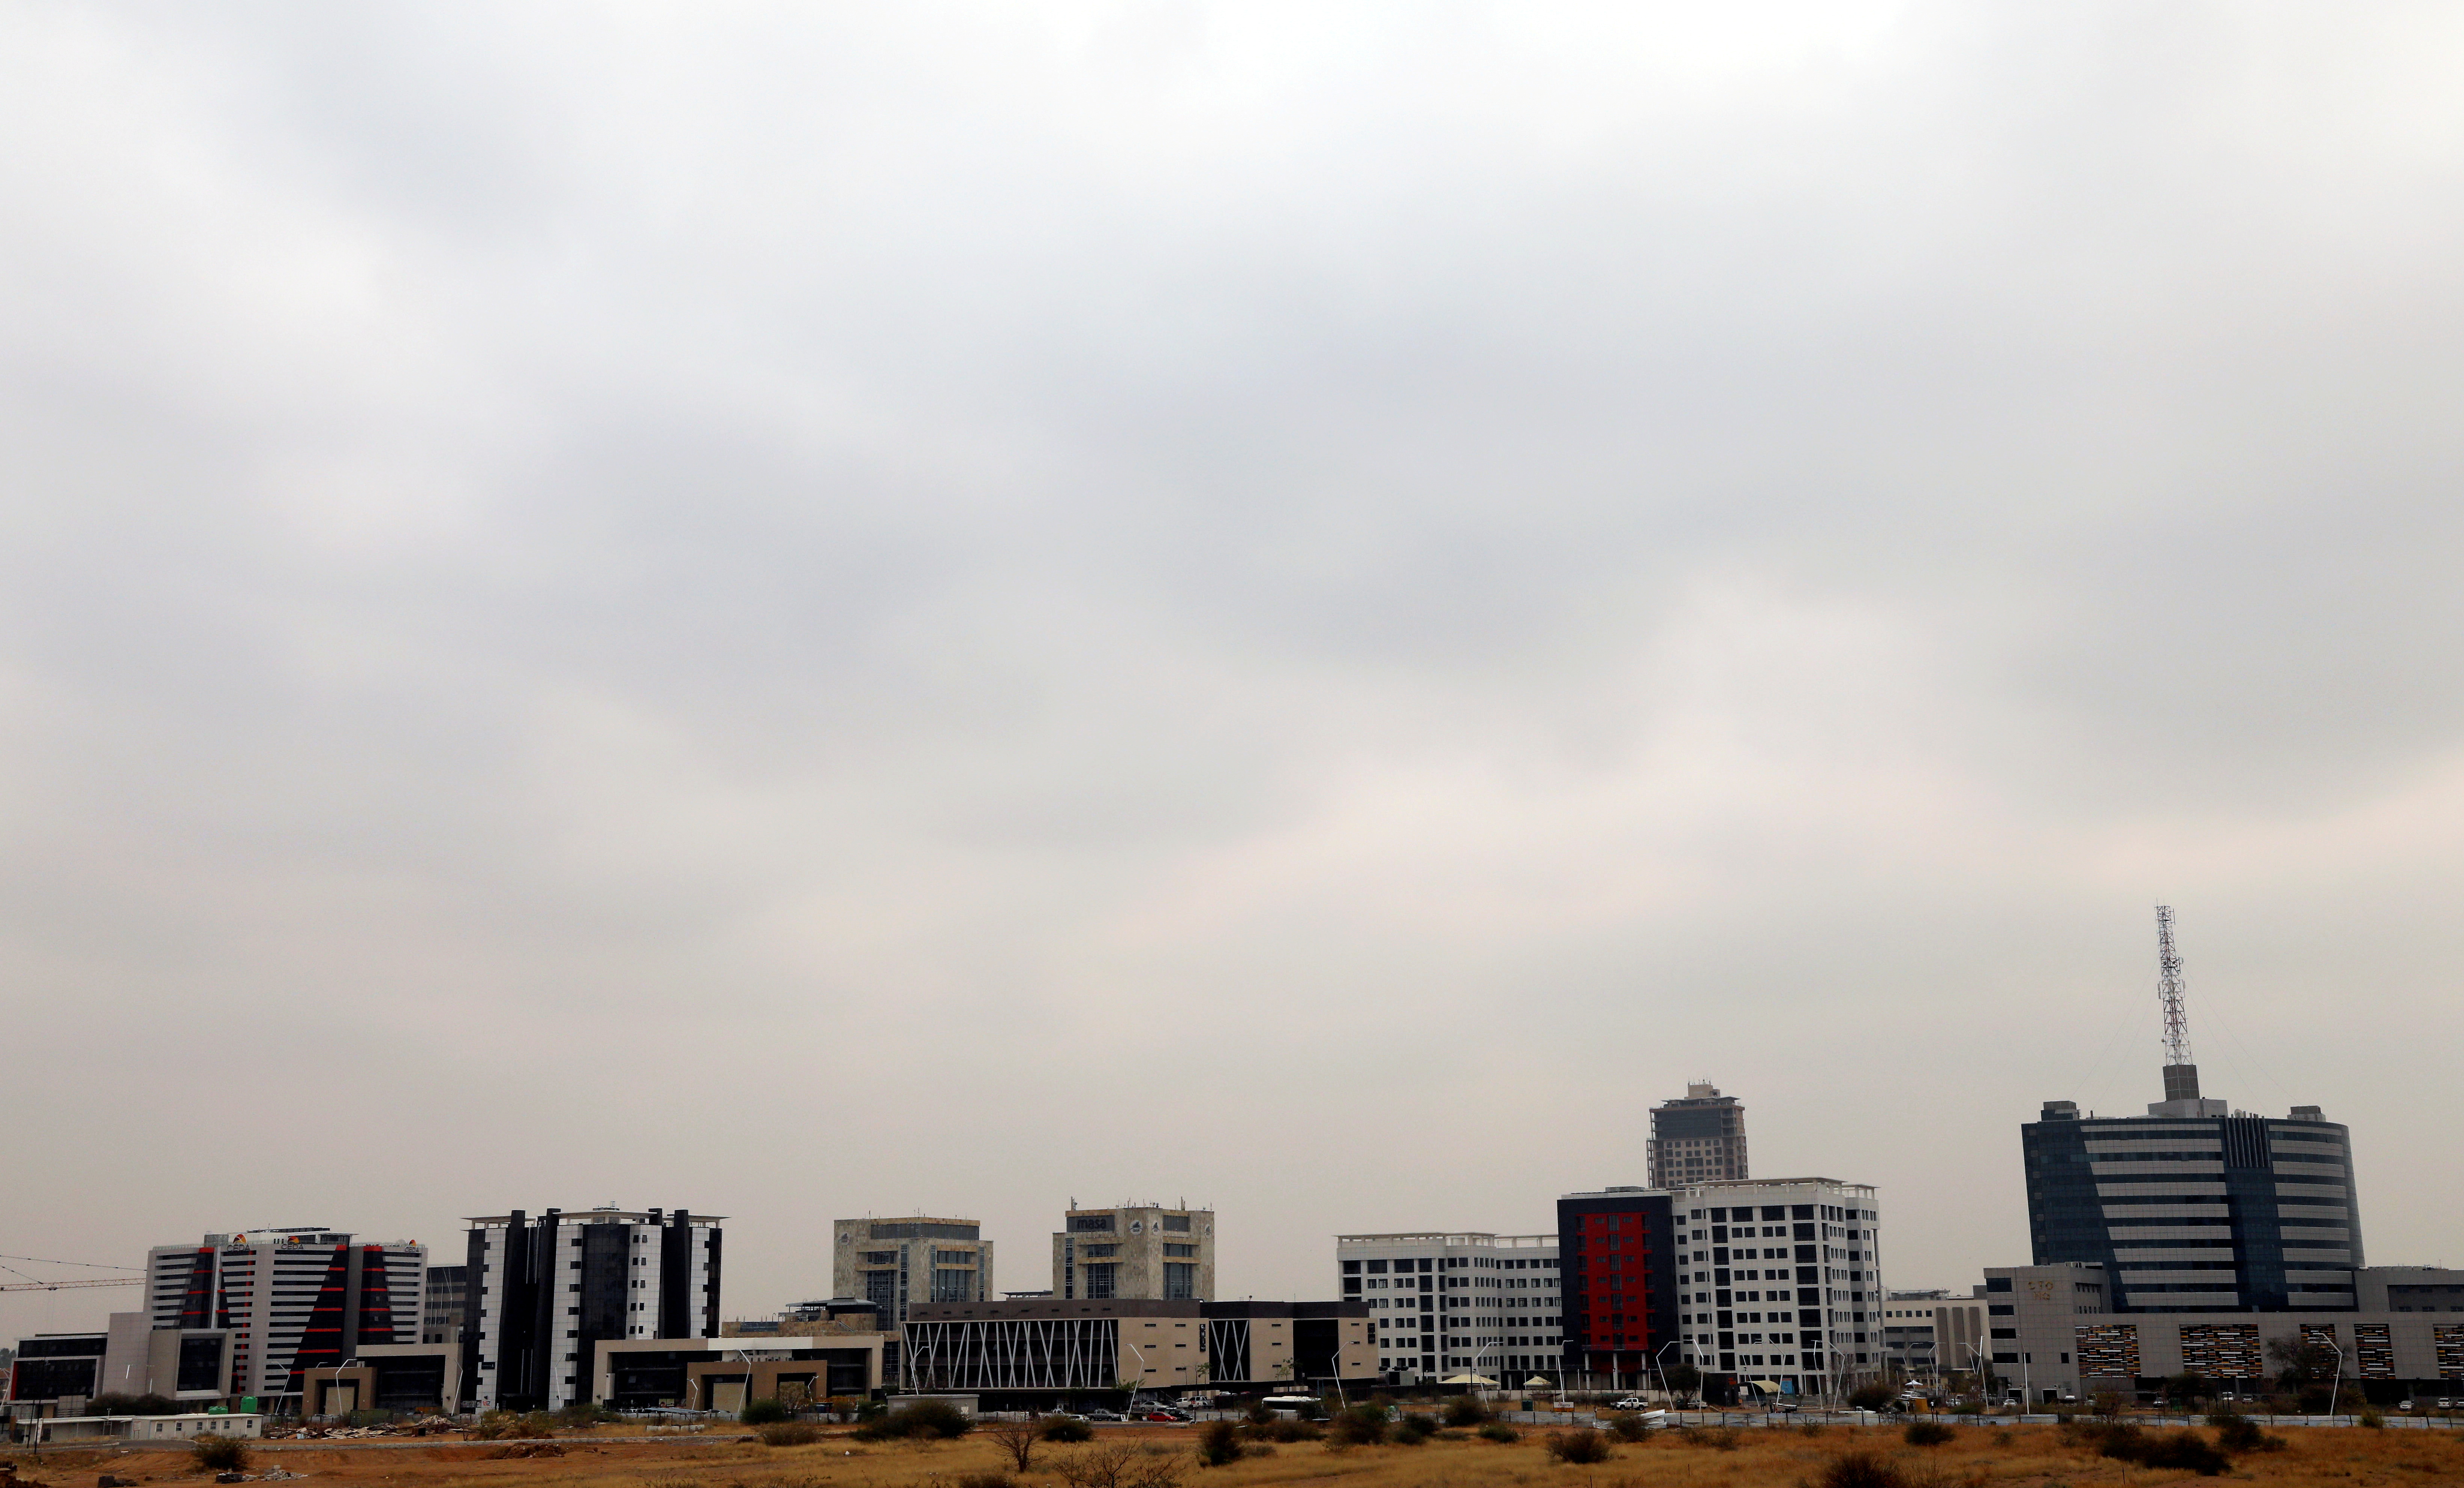 Buildings are seen in the Central Business District (CBD) in the capital Gaborone, Botswana